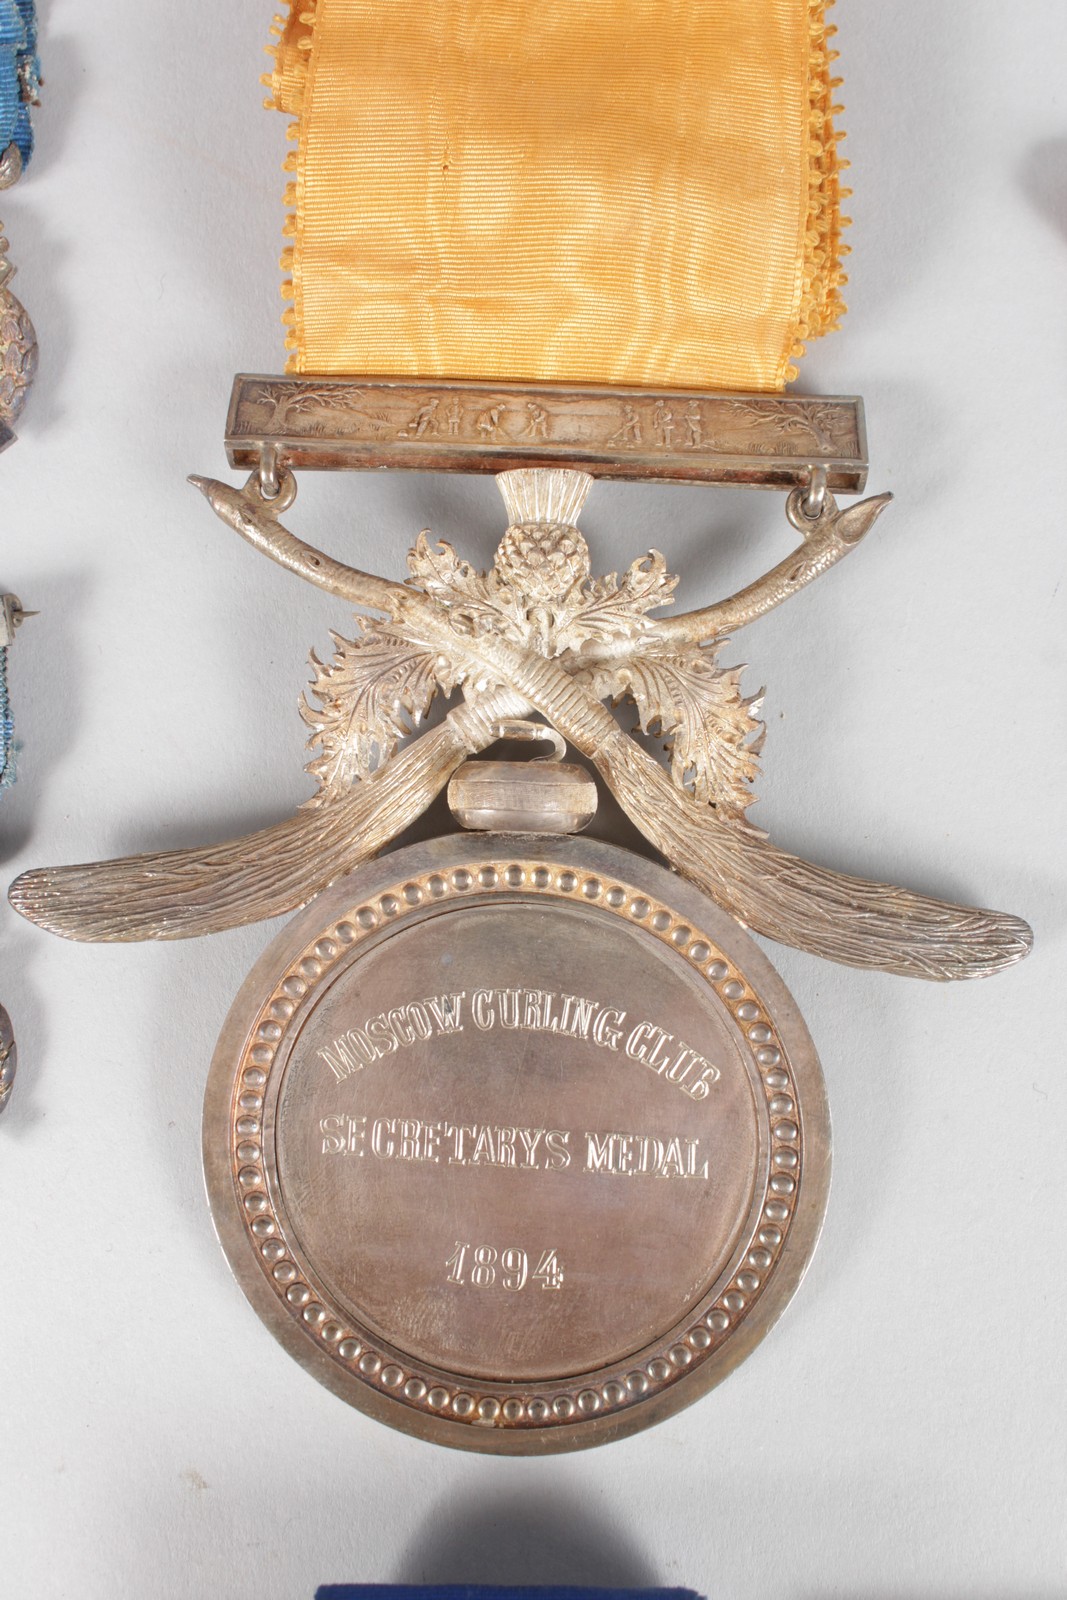 A COLLECTION OF MEDALS won by ALLAN HOOPER, MOSCOW CURLING CLUB, CIRCA. 1890-1910 (11), and five - Image 2 of 7